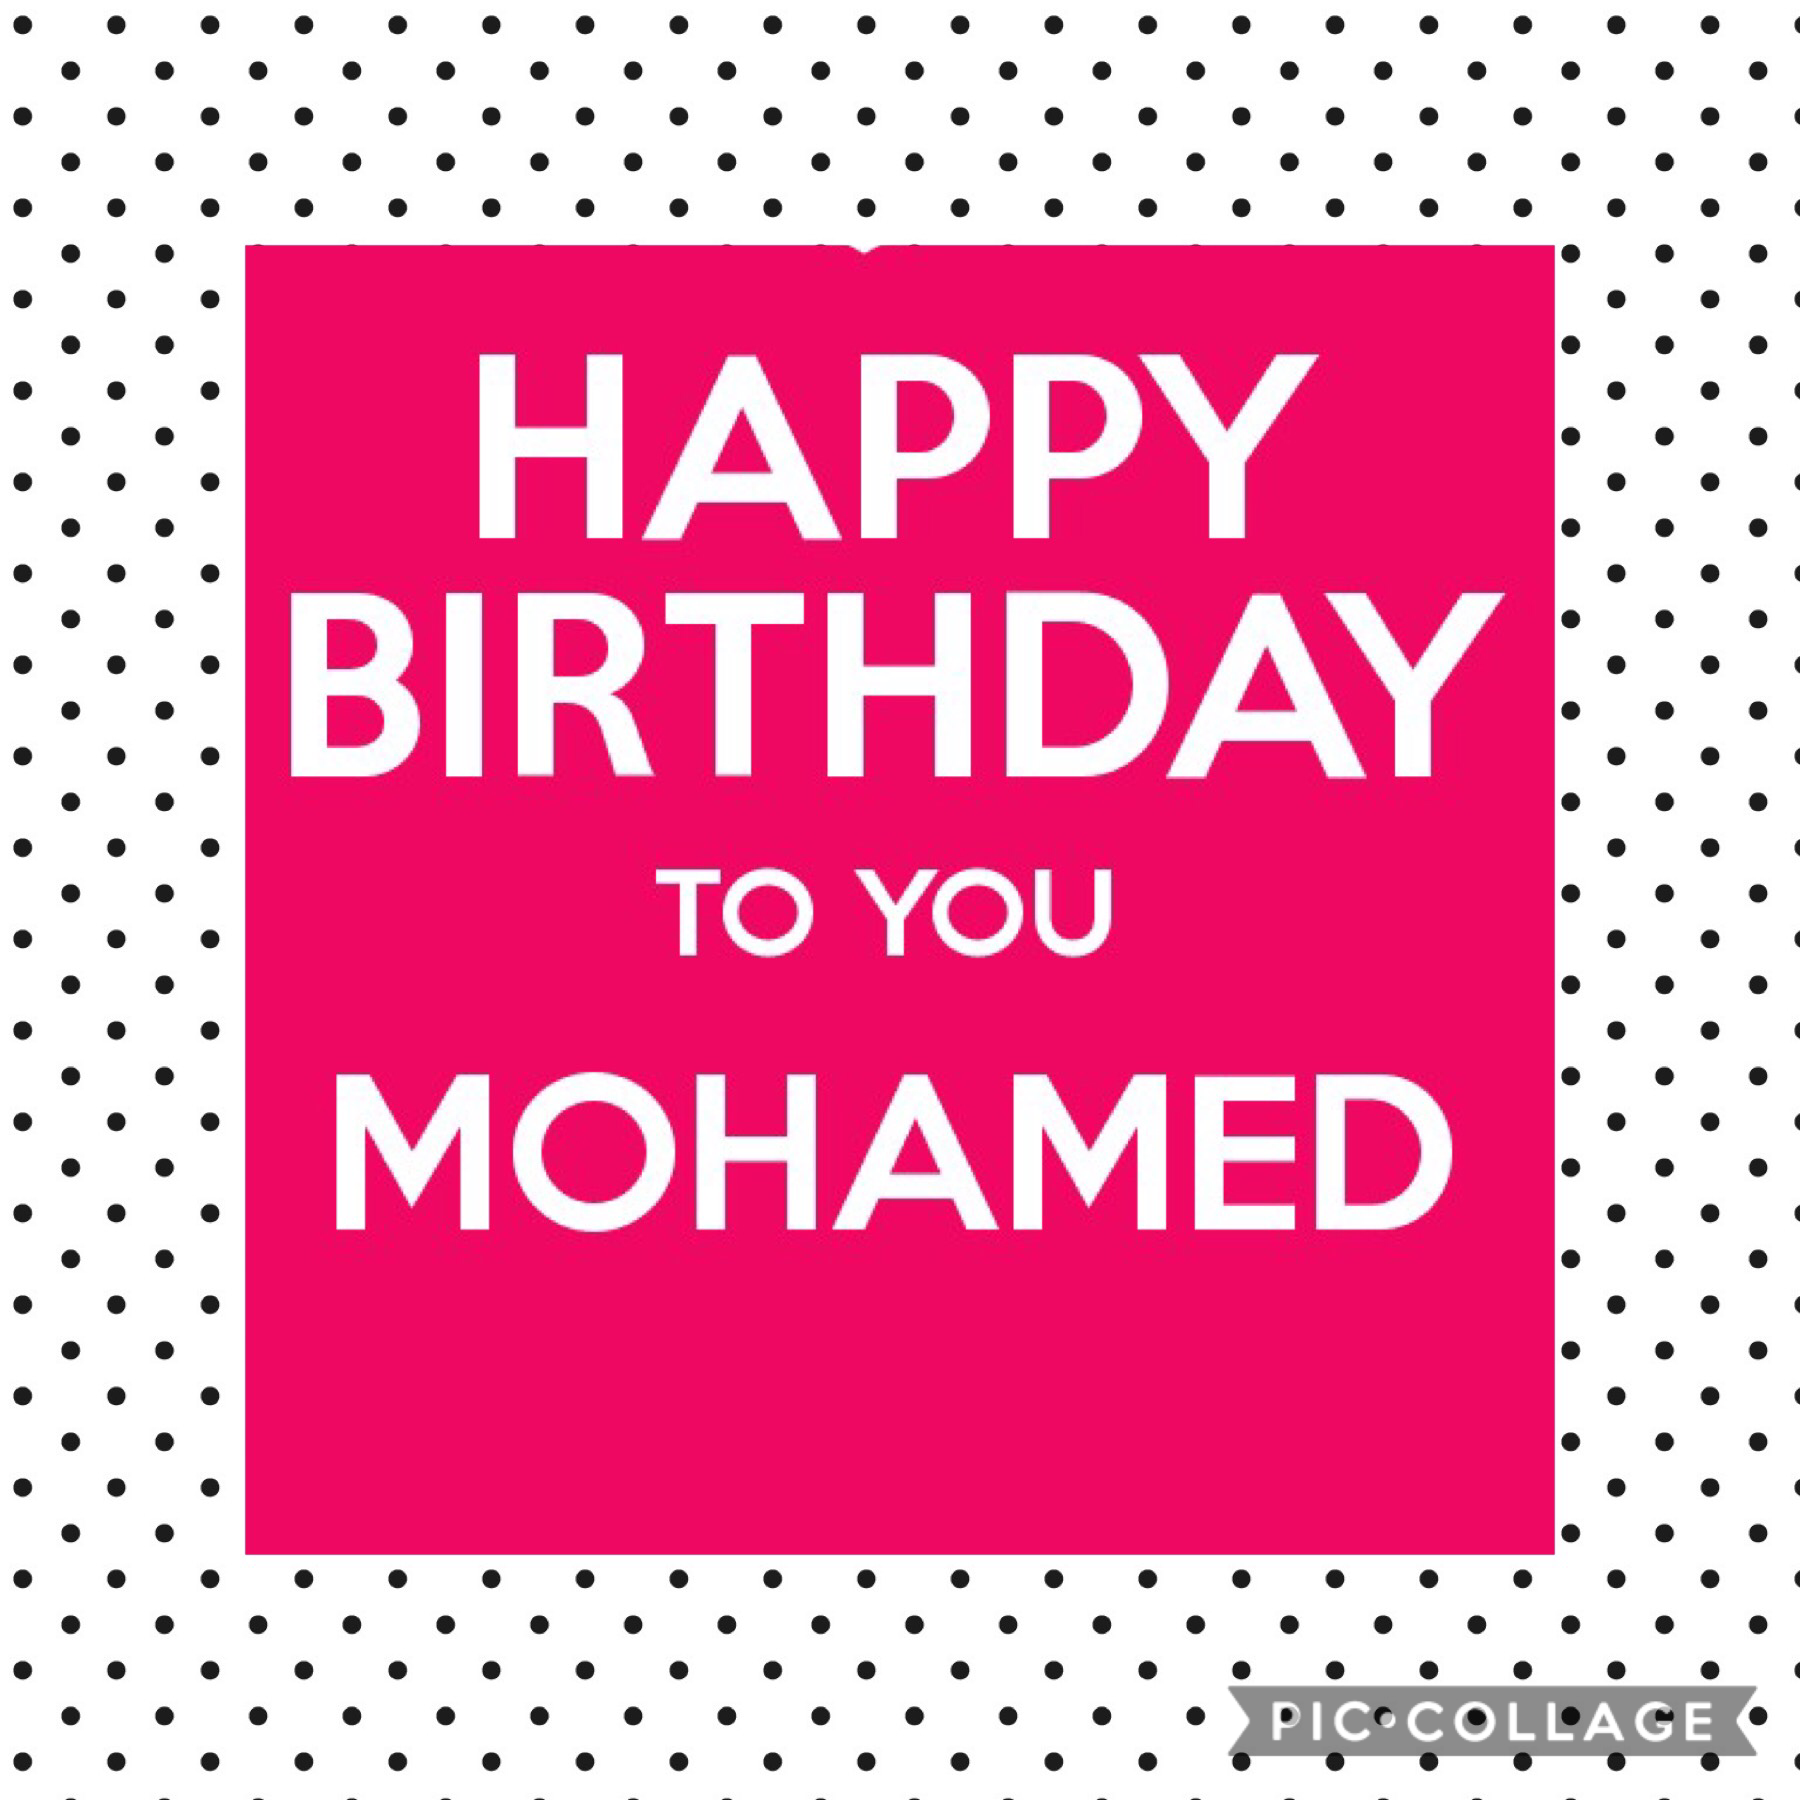 Happy birthday to to anyone names Mohamed .

Like how names Mohamed.